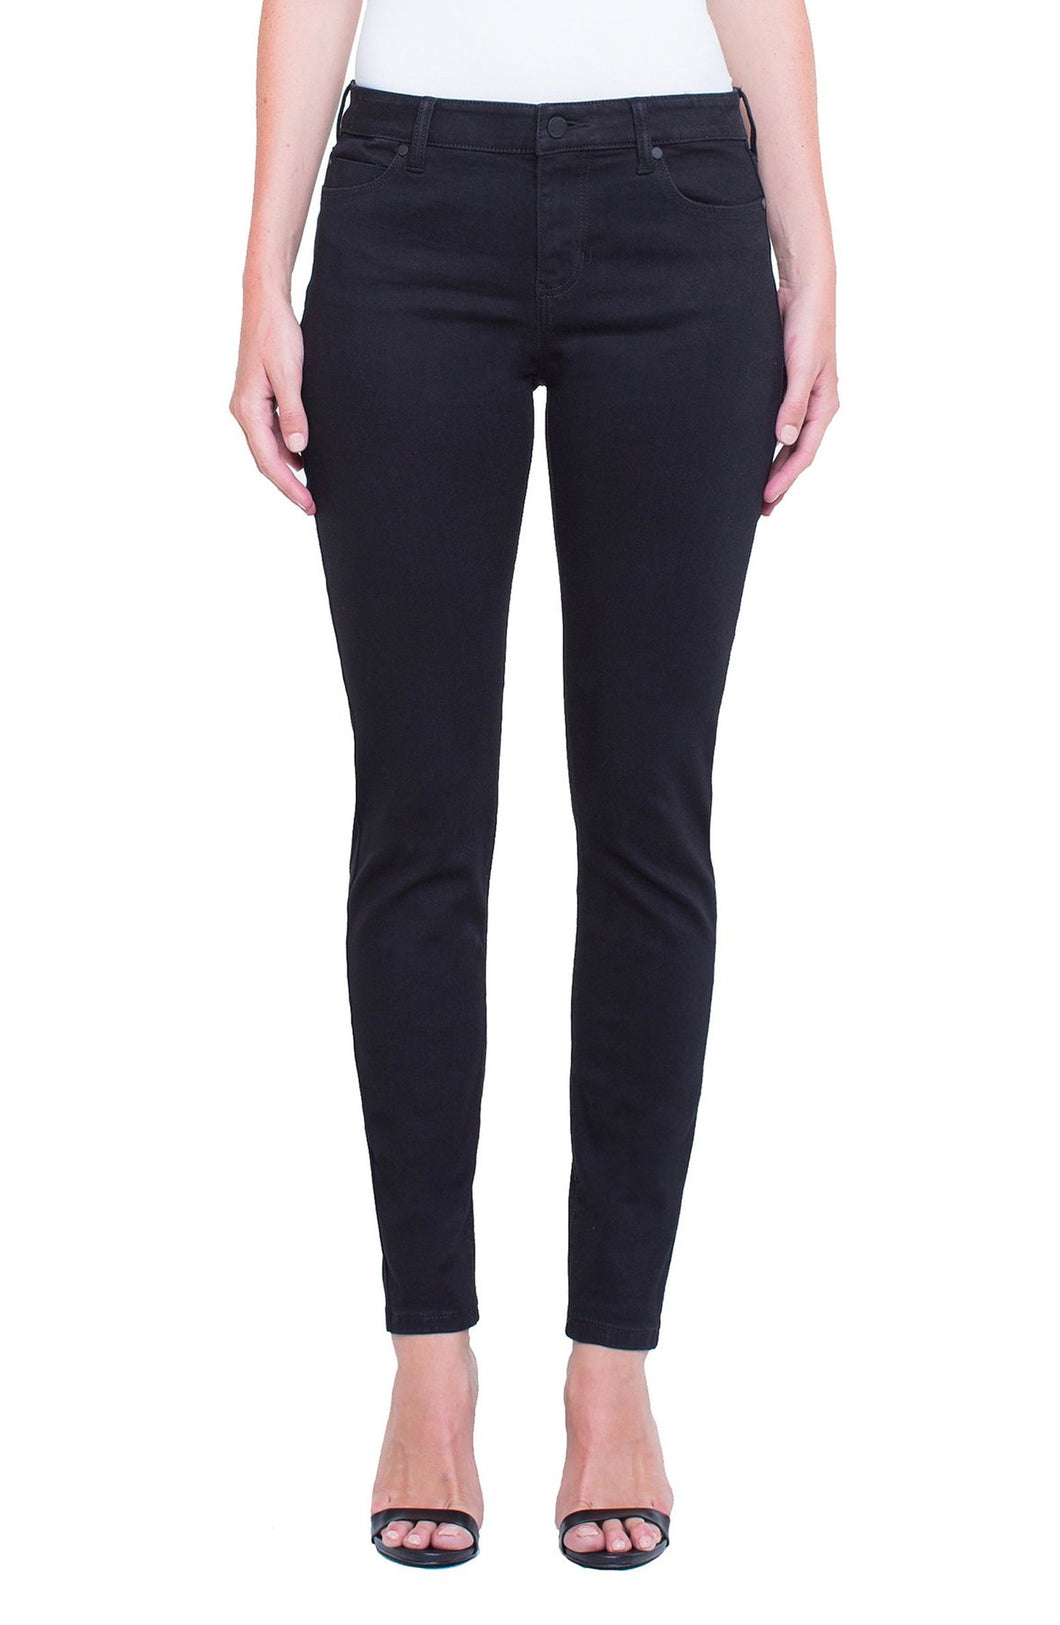 The Abby Ankle Skinny Perfect Black Jean by Liverpool Jeans